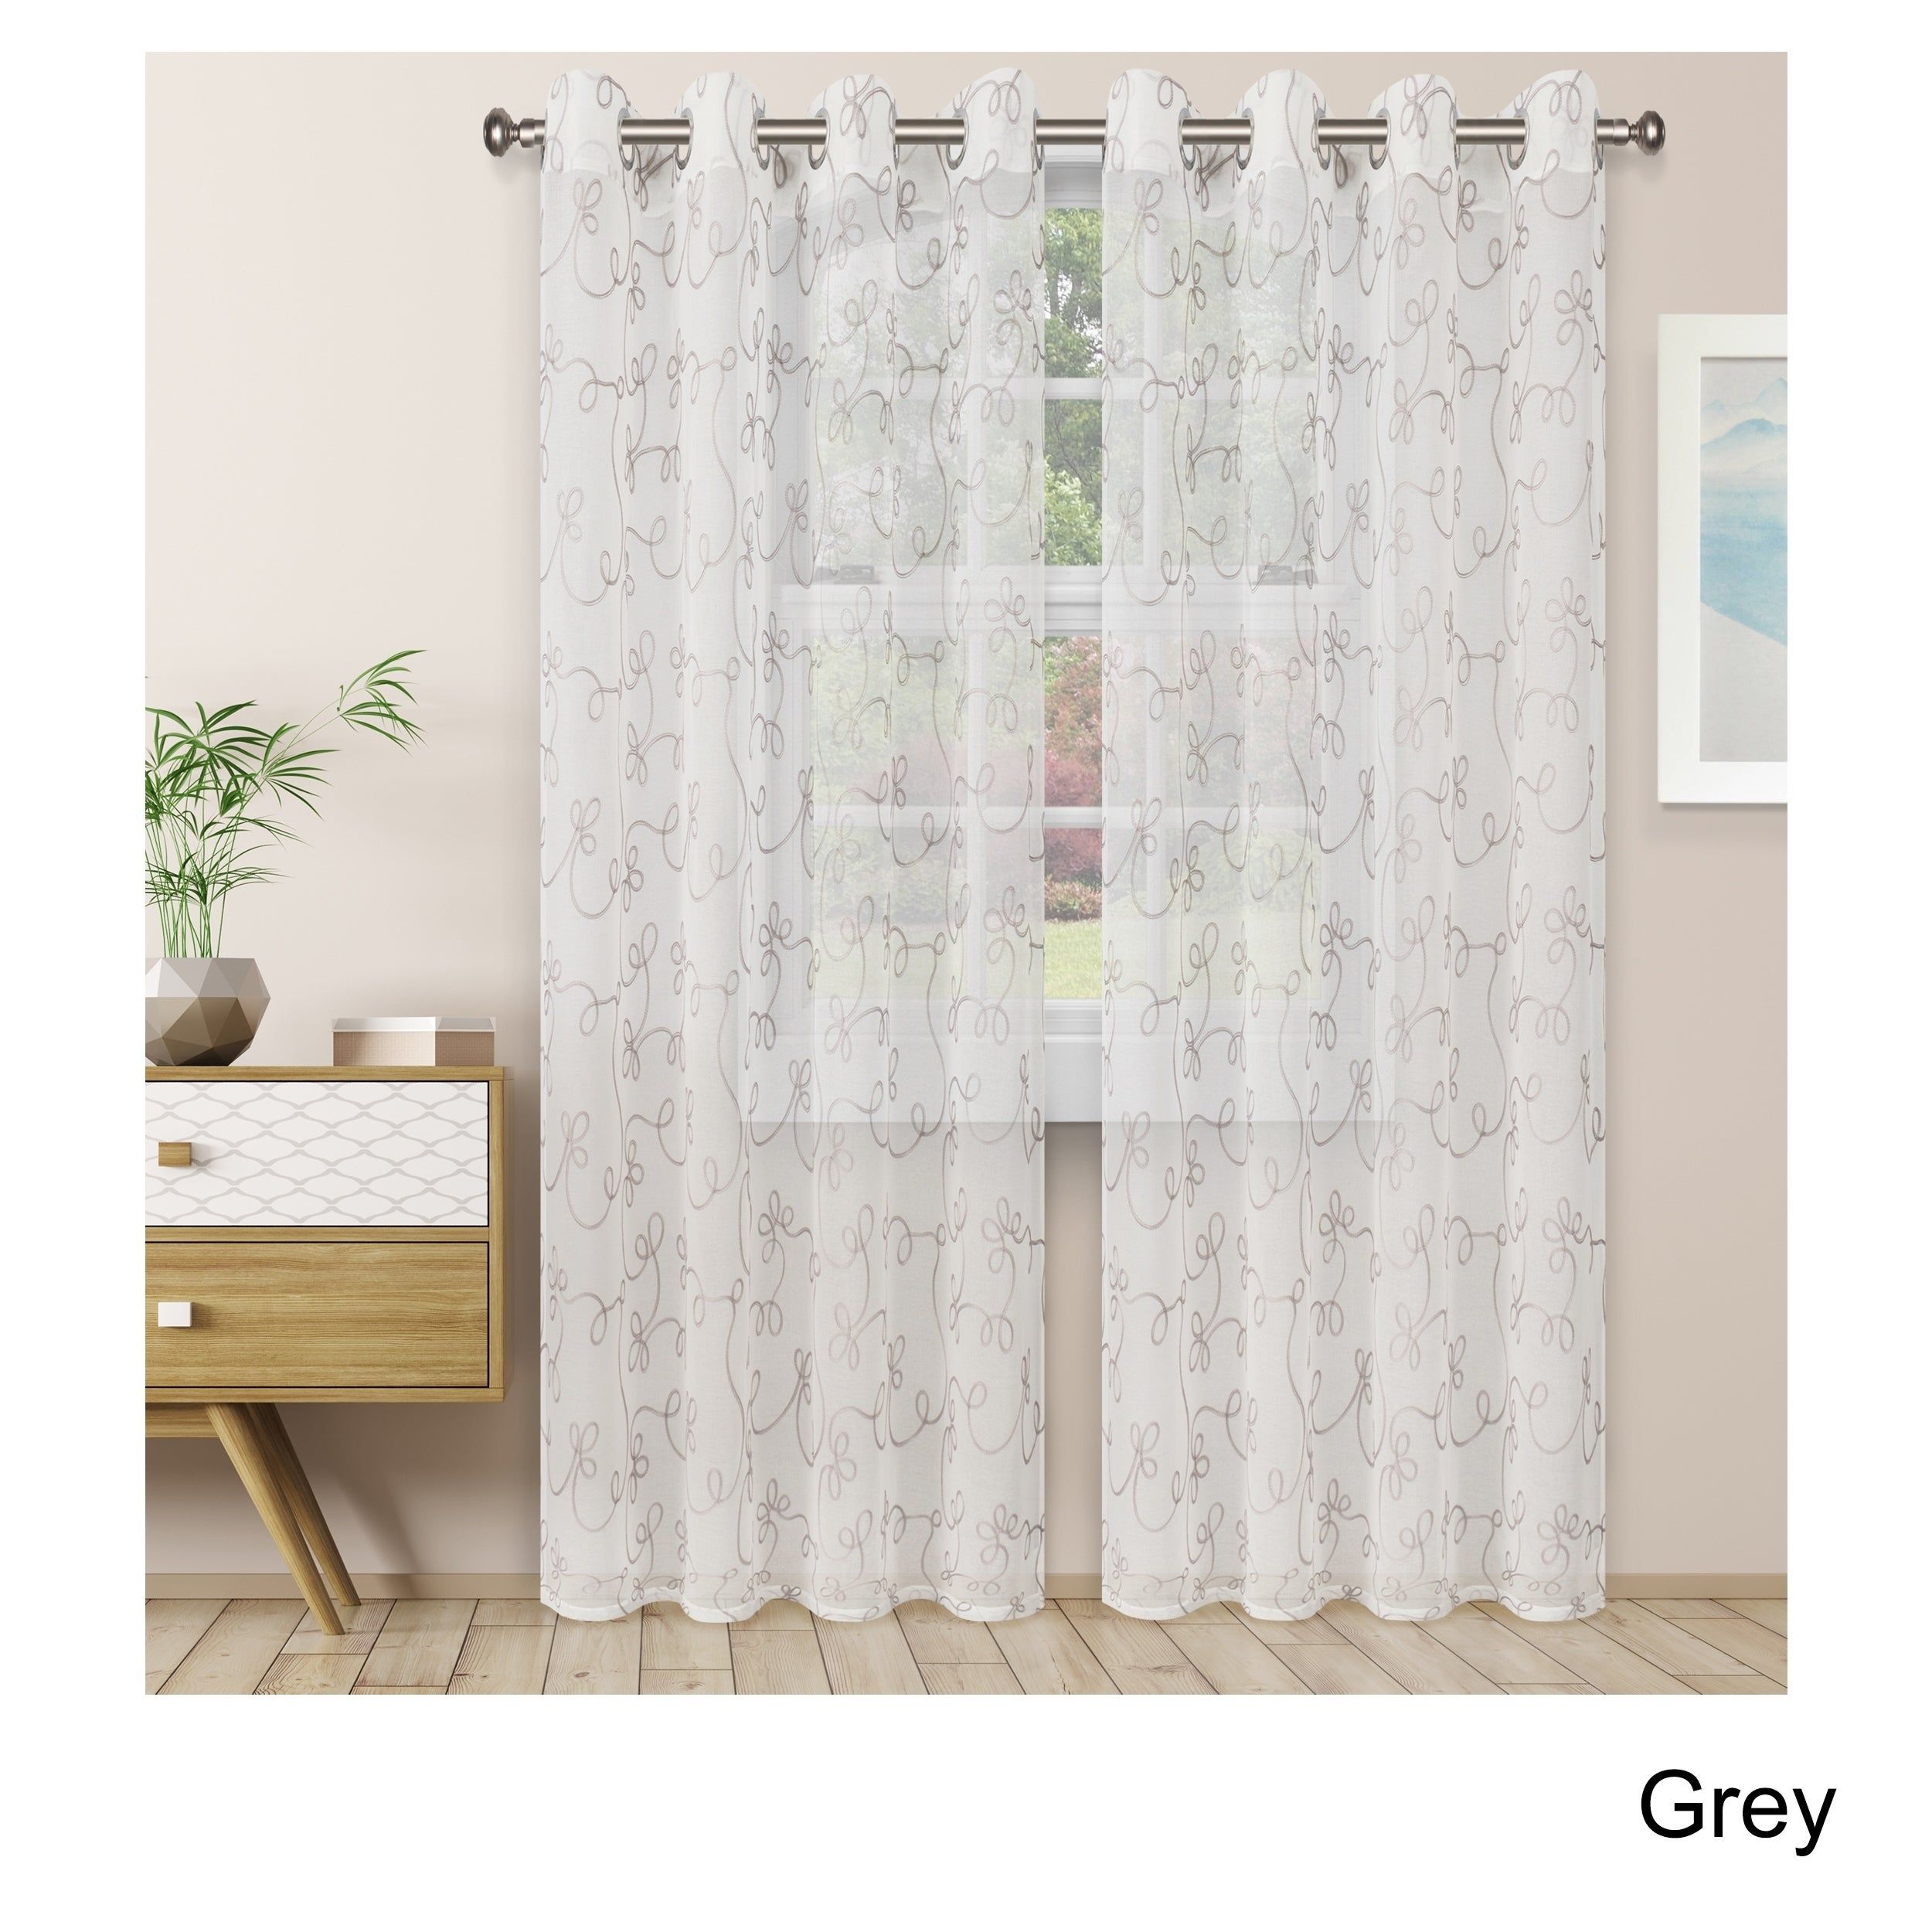 Superior Embroidered Scroll Sheer Grommet Curtain Panel Pair In Overseas Leaf Swirl Embroidered Curtain Panel Pairs (View 3 of 20)